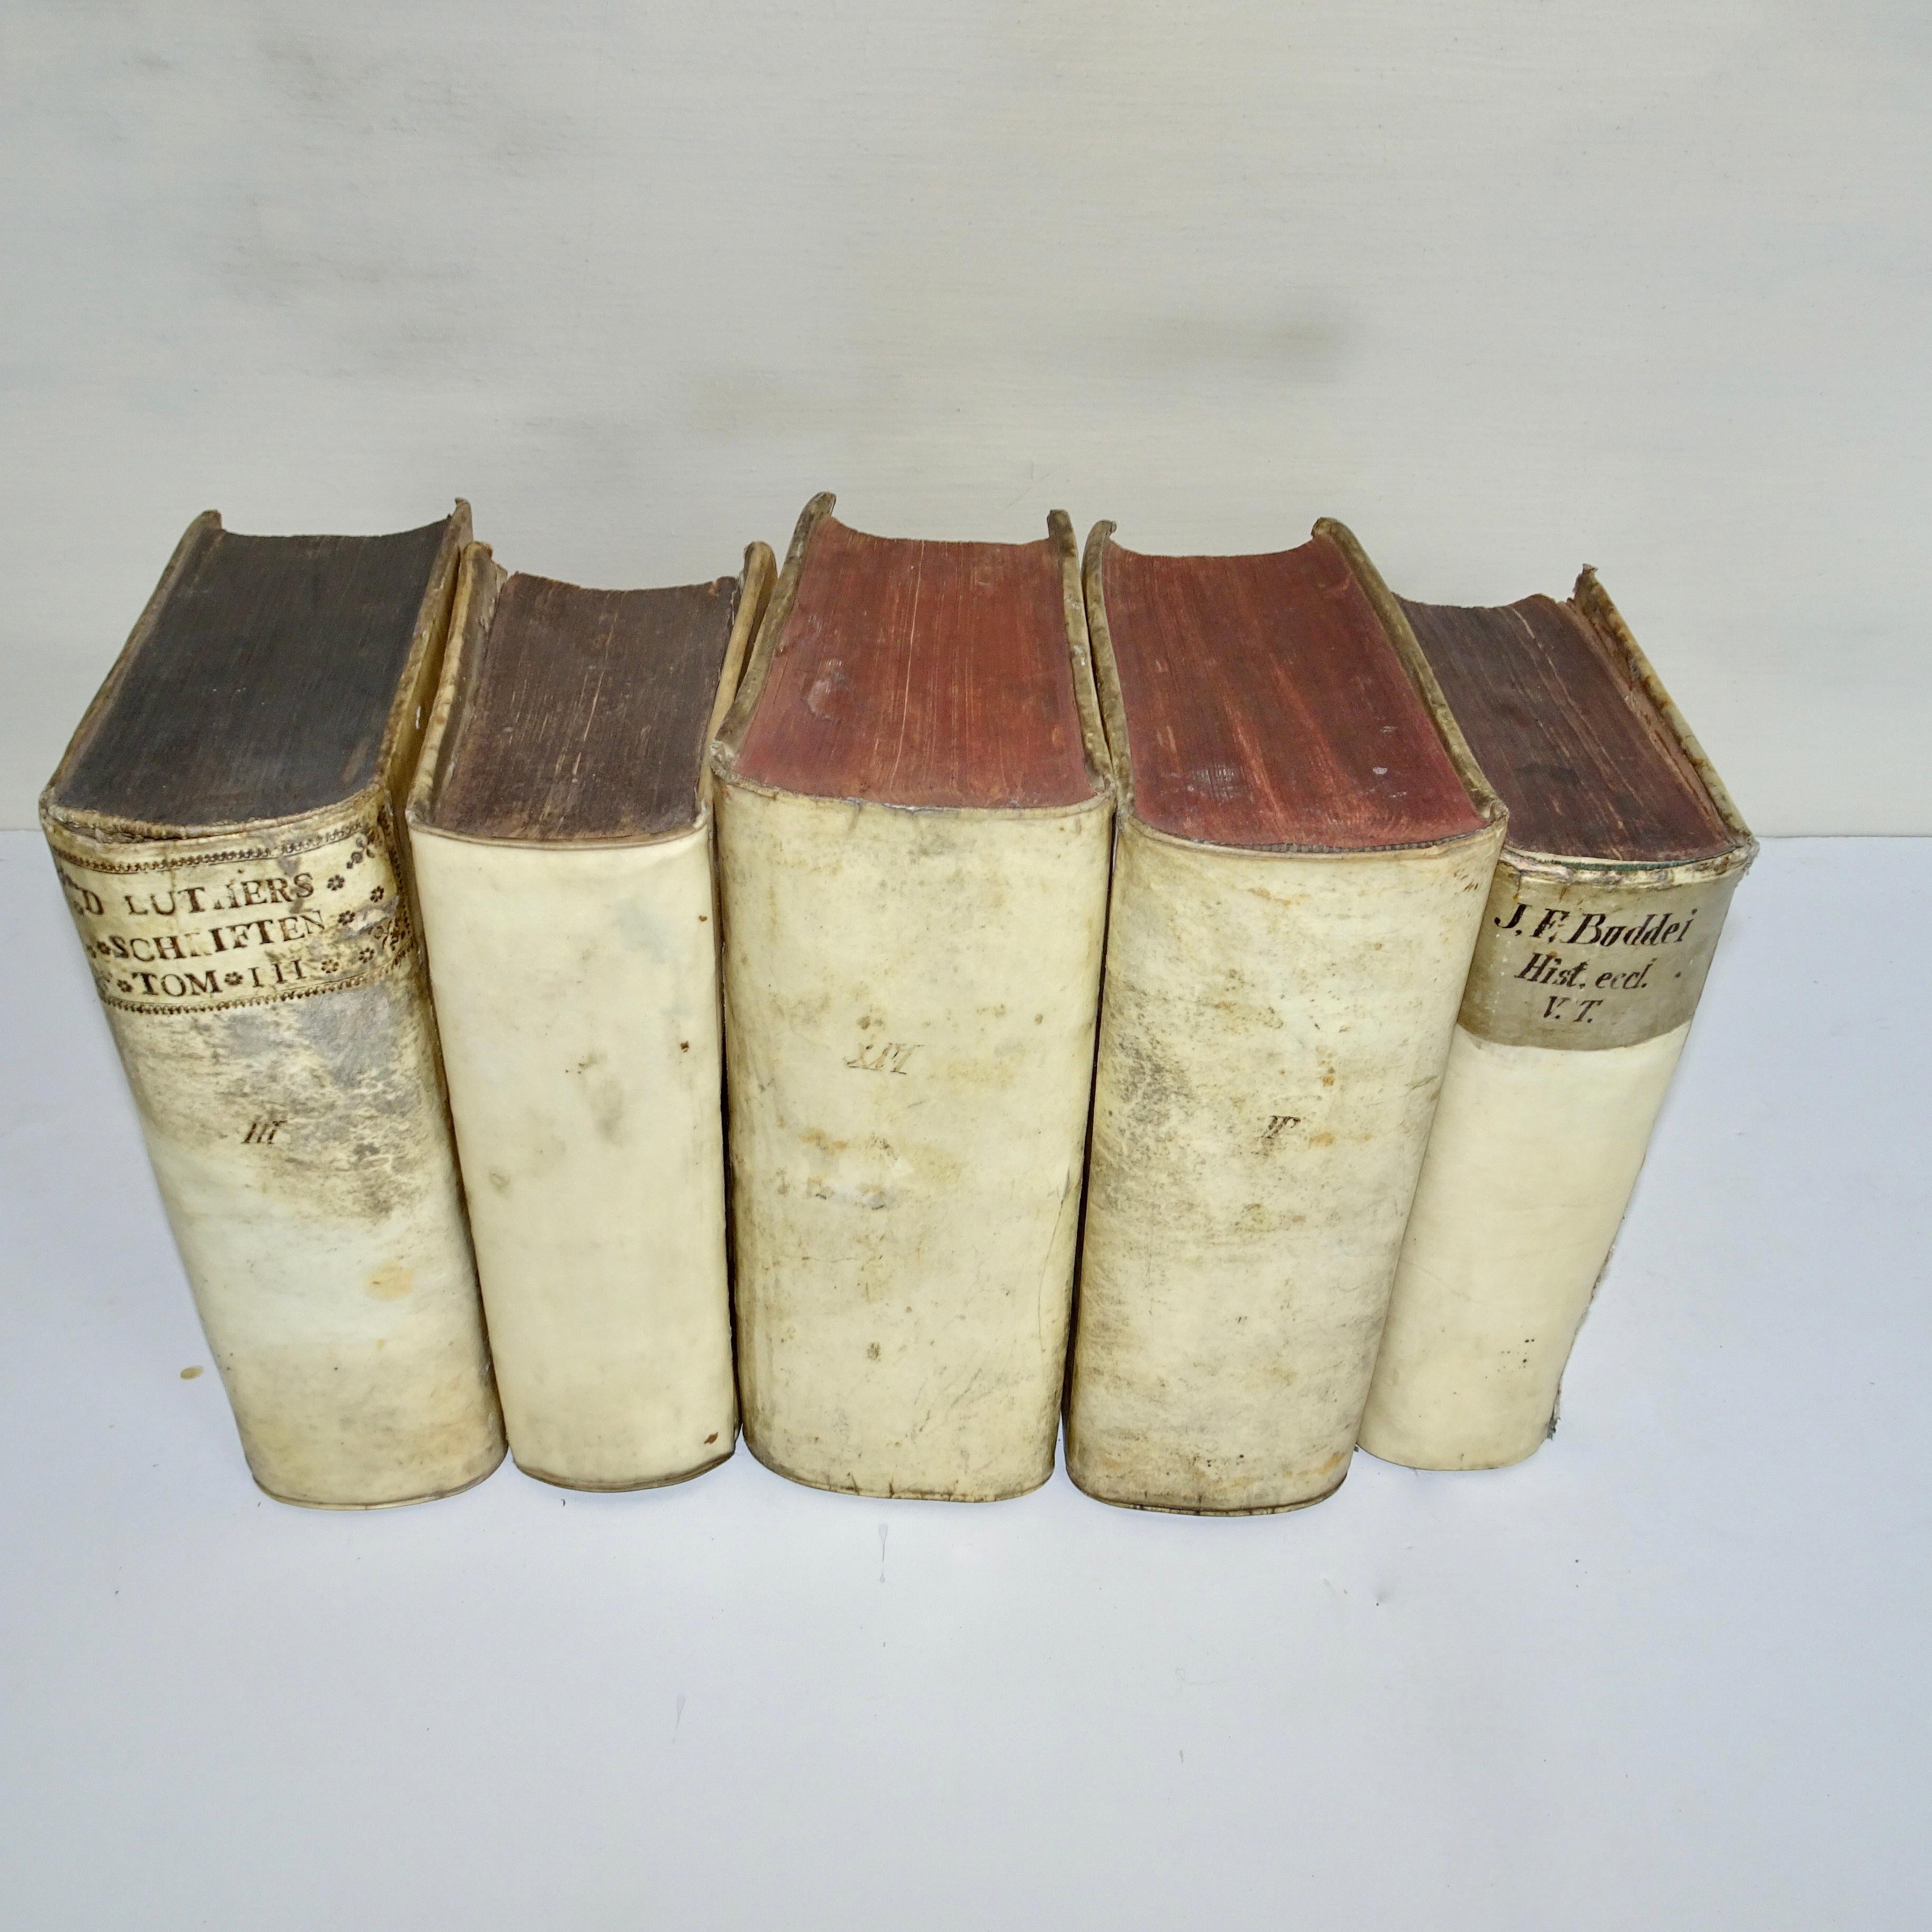 A nice collection of 17th and 18th Century all Vellum Books in a set of five. Please take a look at all the Vellum books I have for sale on my site.   All Vellum books on Sale